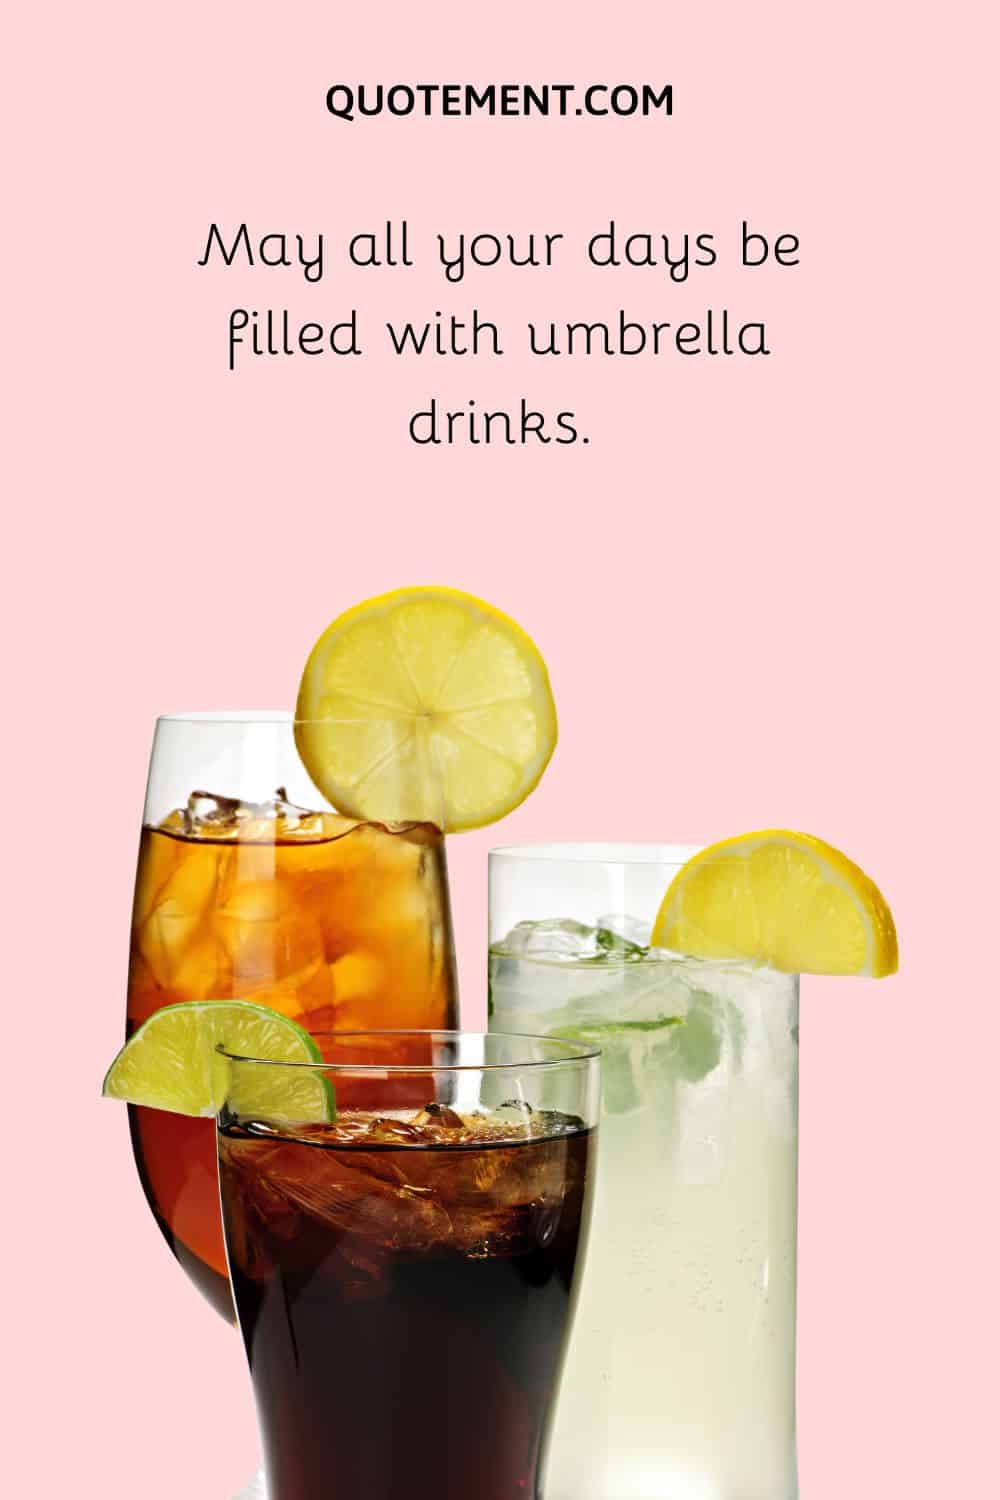 May all your days be filled with umbrella drinks